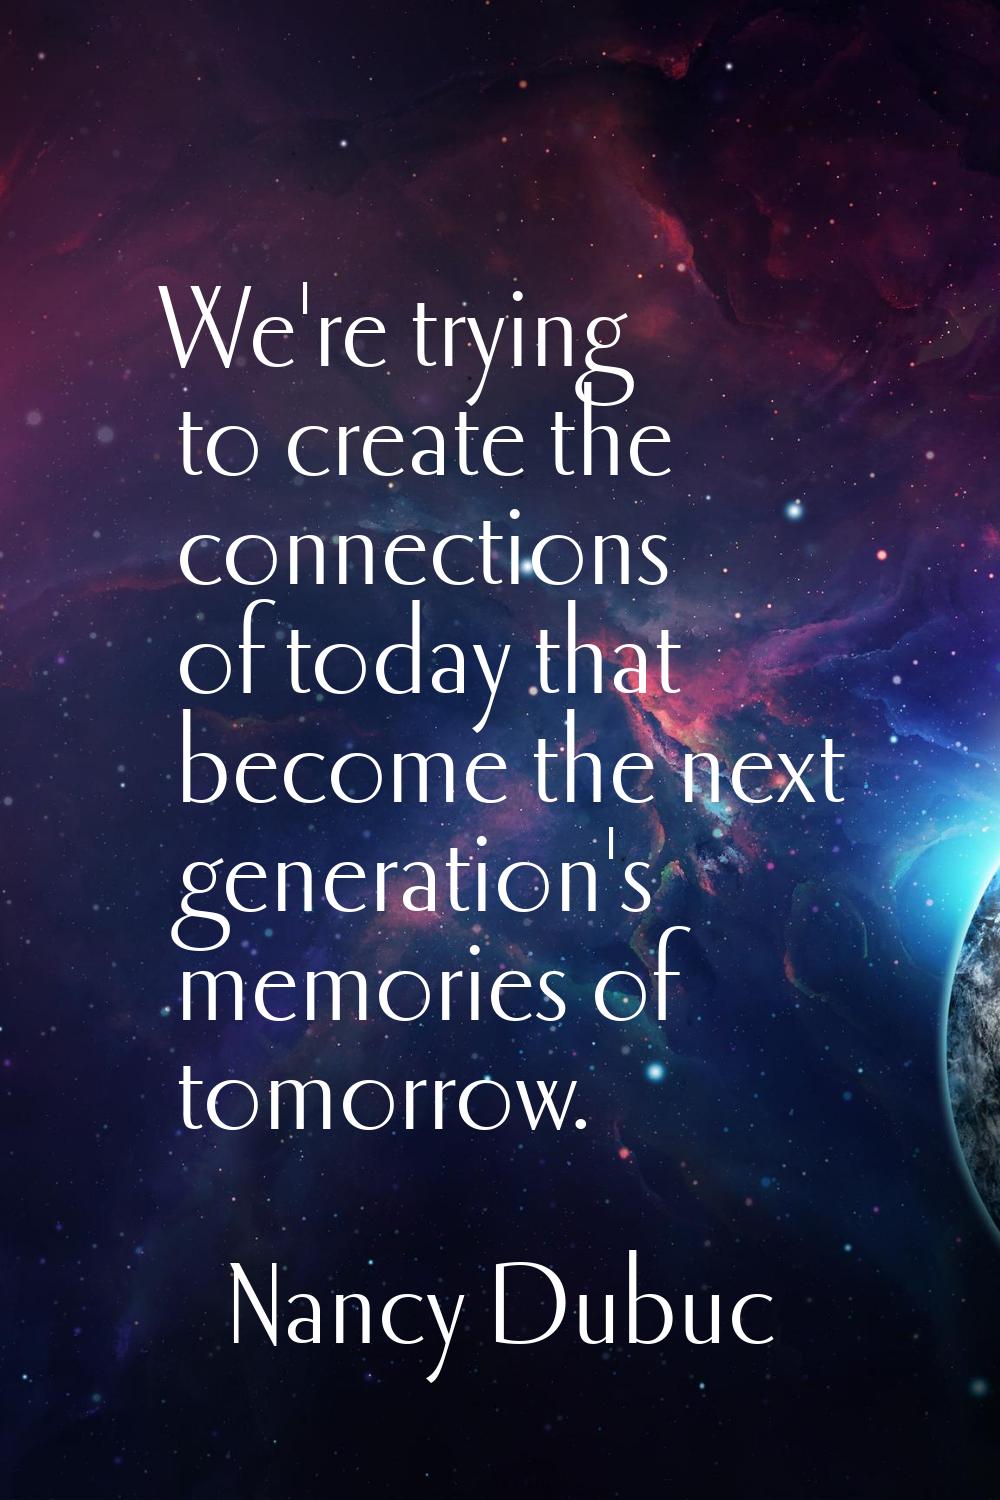 We're trying to create the connections of today that become the next generation's memories of tomor